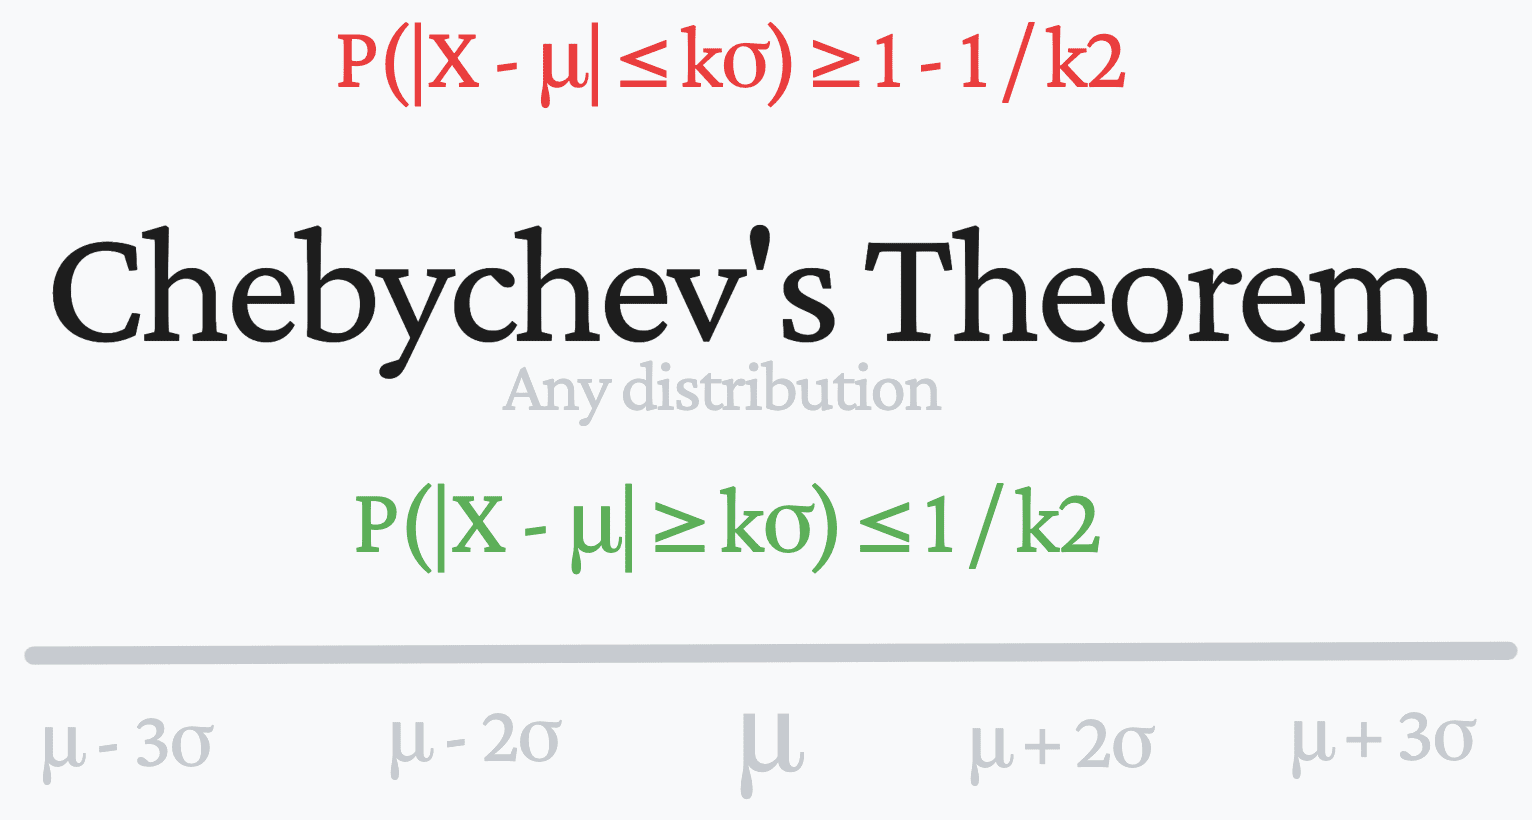 What is Chebychev's Theorem and How Does it Apply to Data Science?